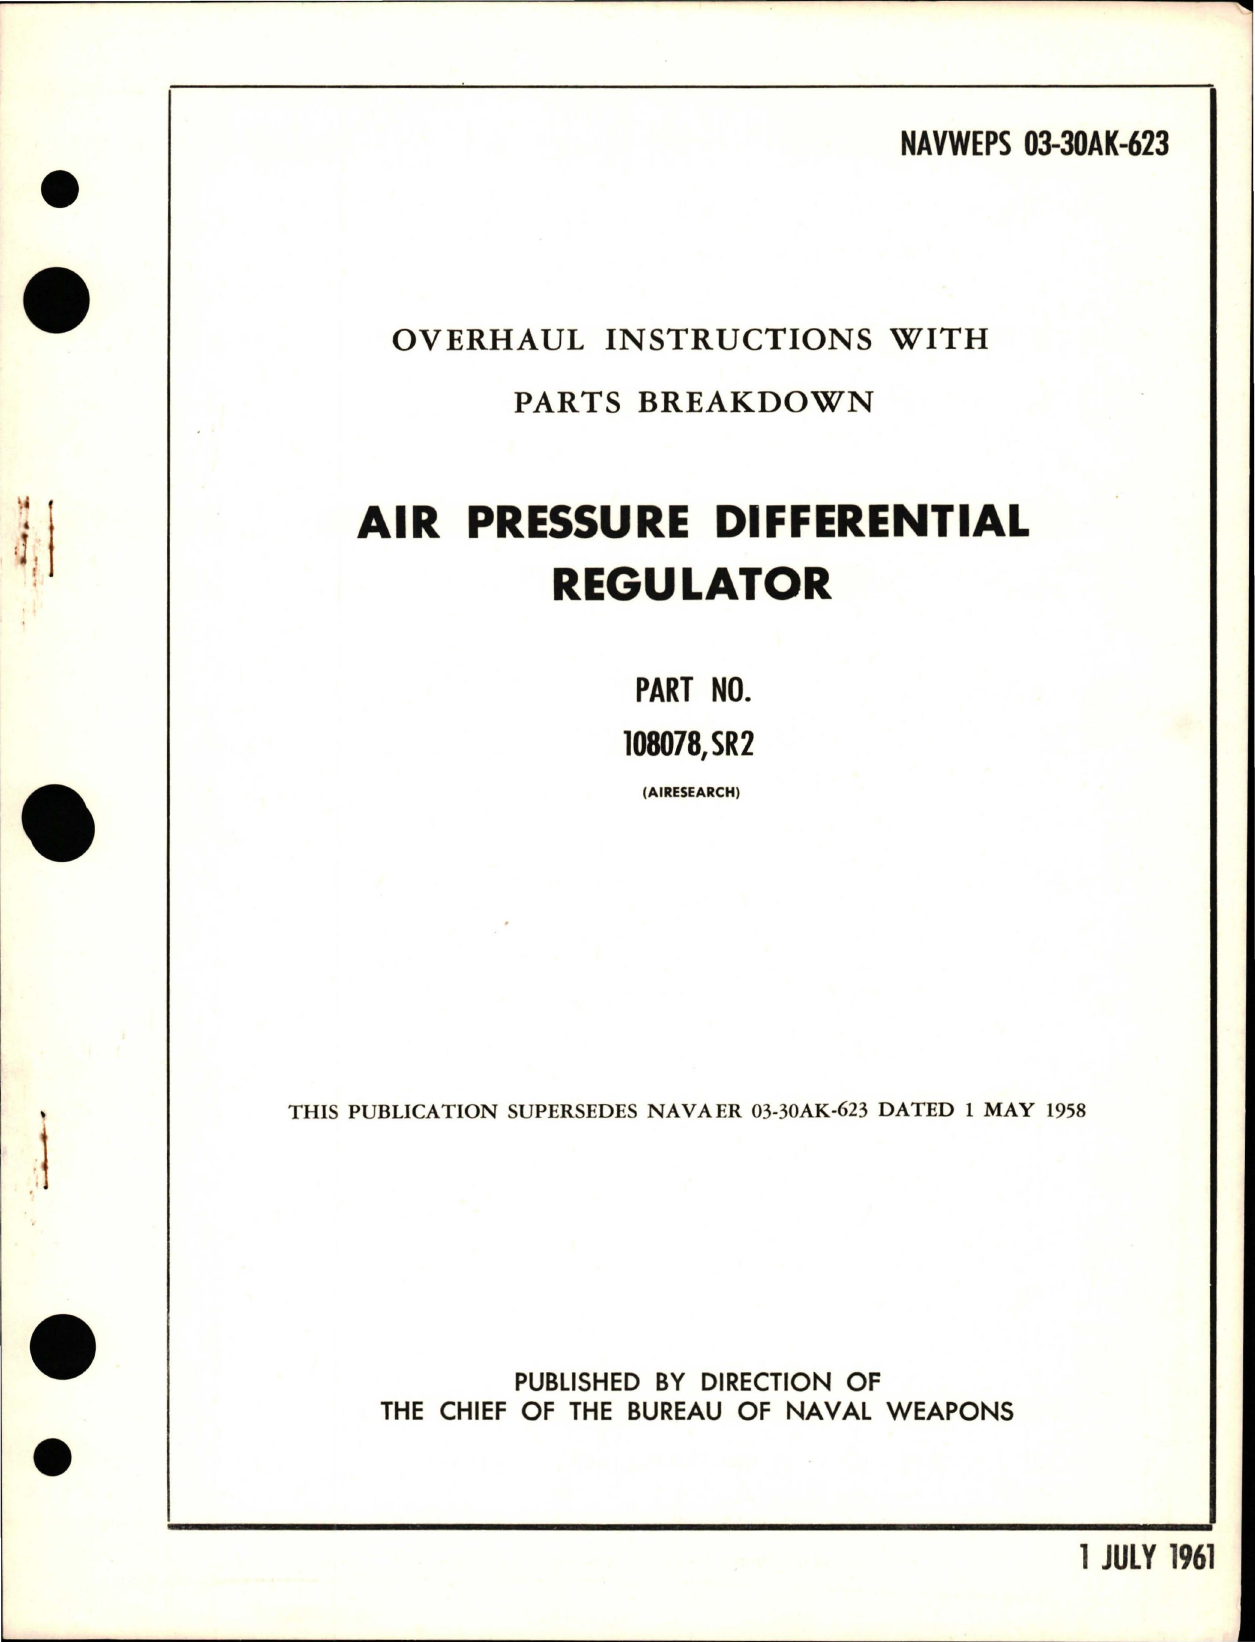 Sample page 1 from AirCorps Library document: Overhaul Instructions with Parts Breakdown for Air Pressure Differential Regulator - Part 108078, SR2